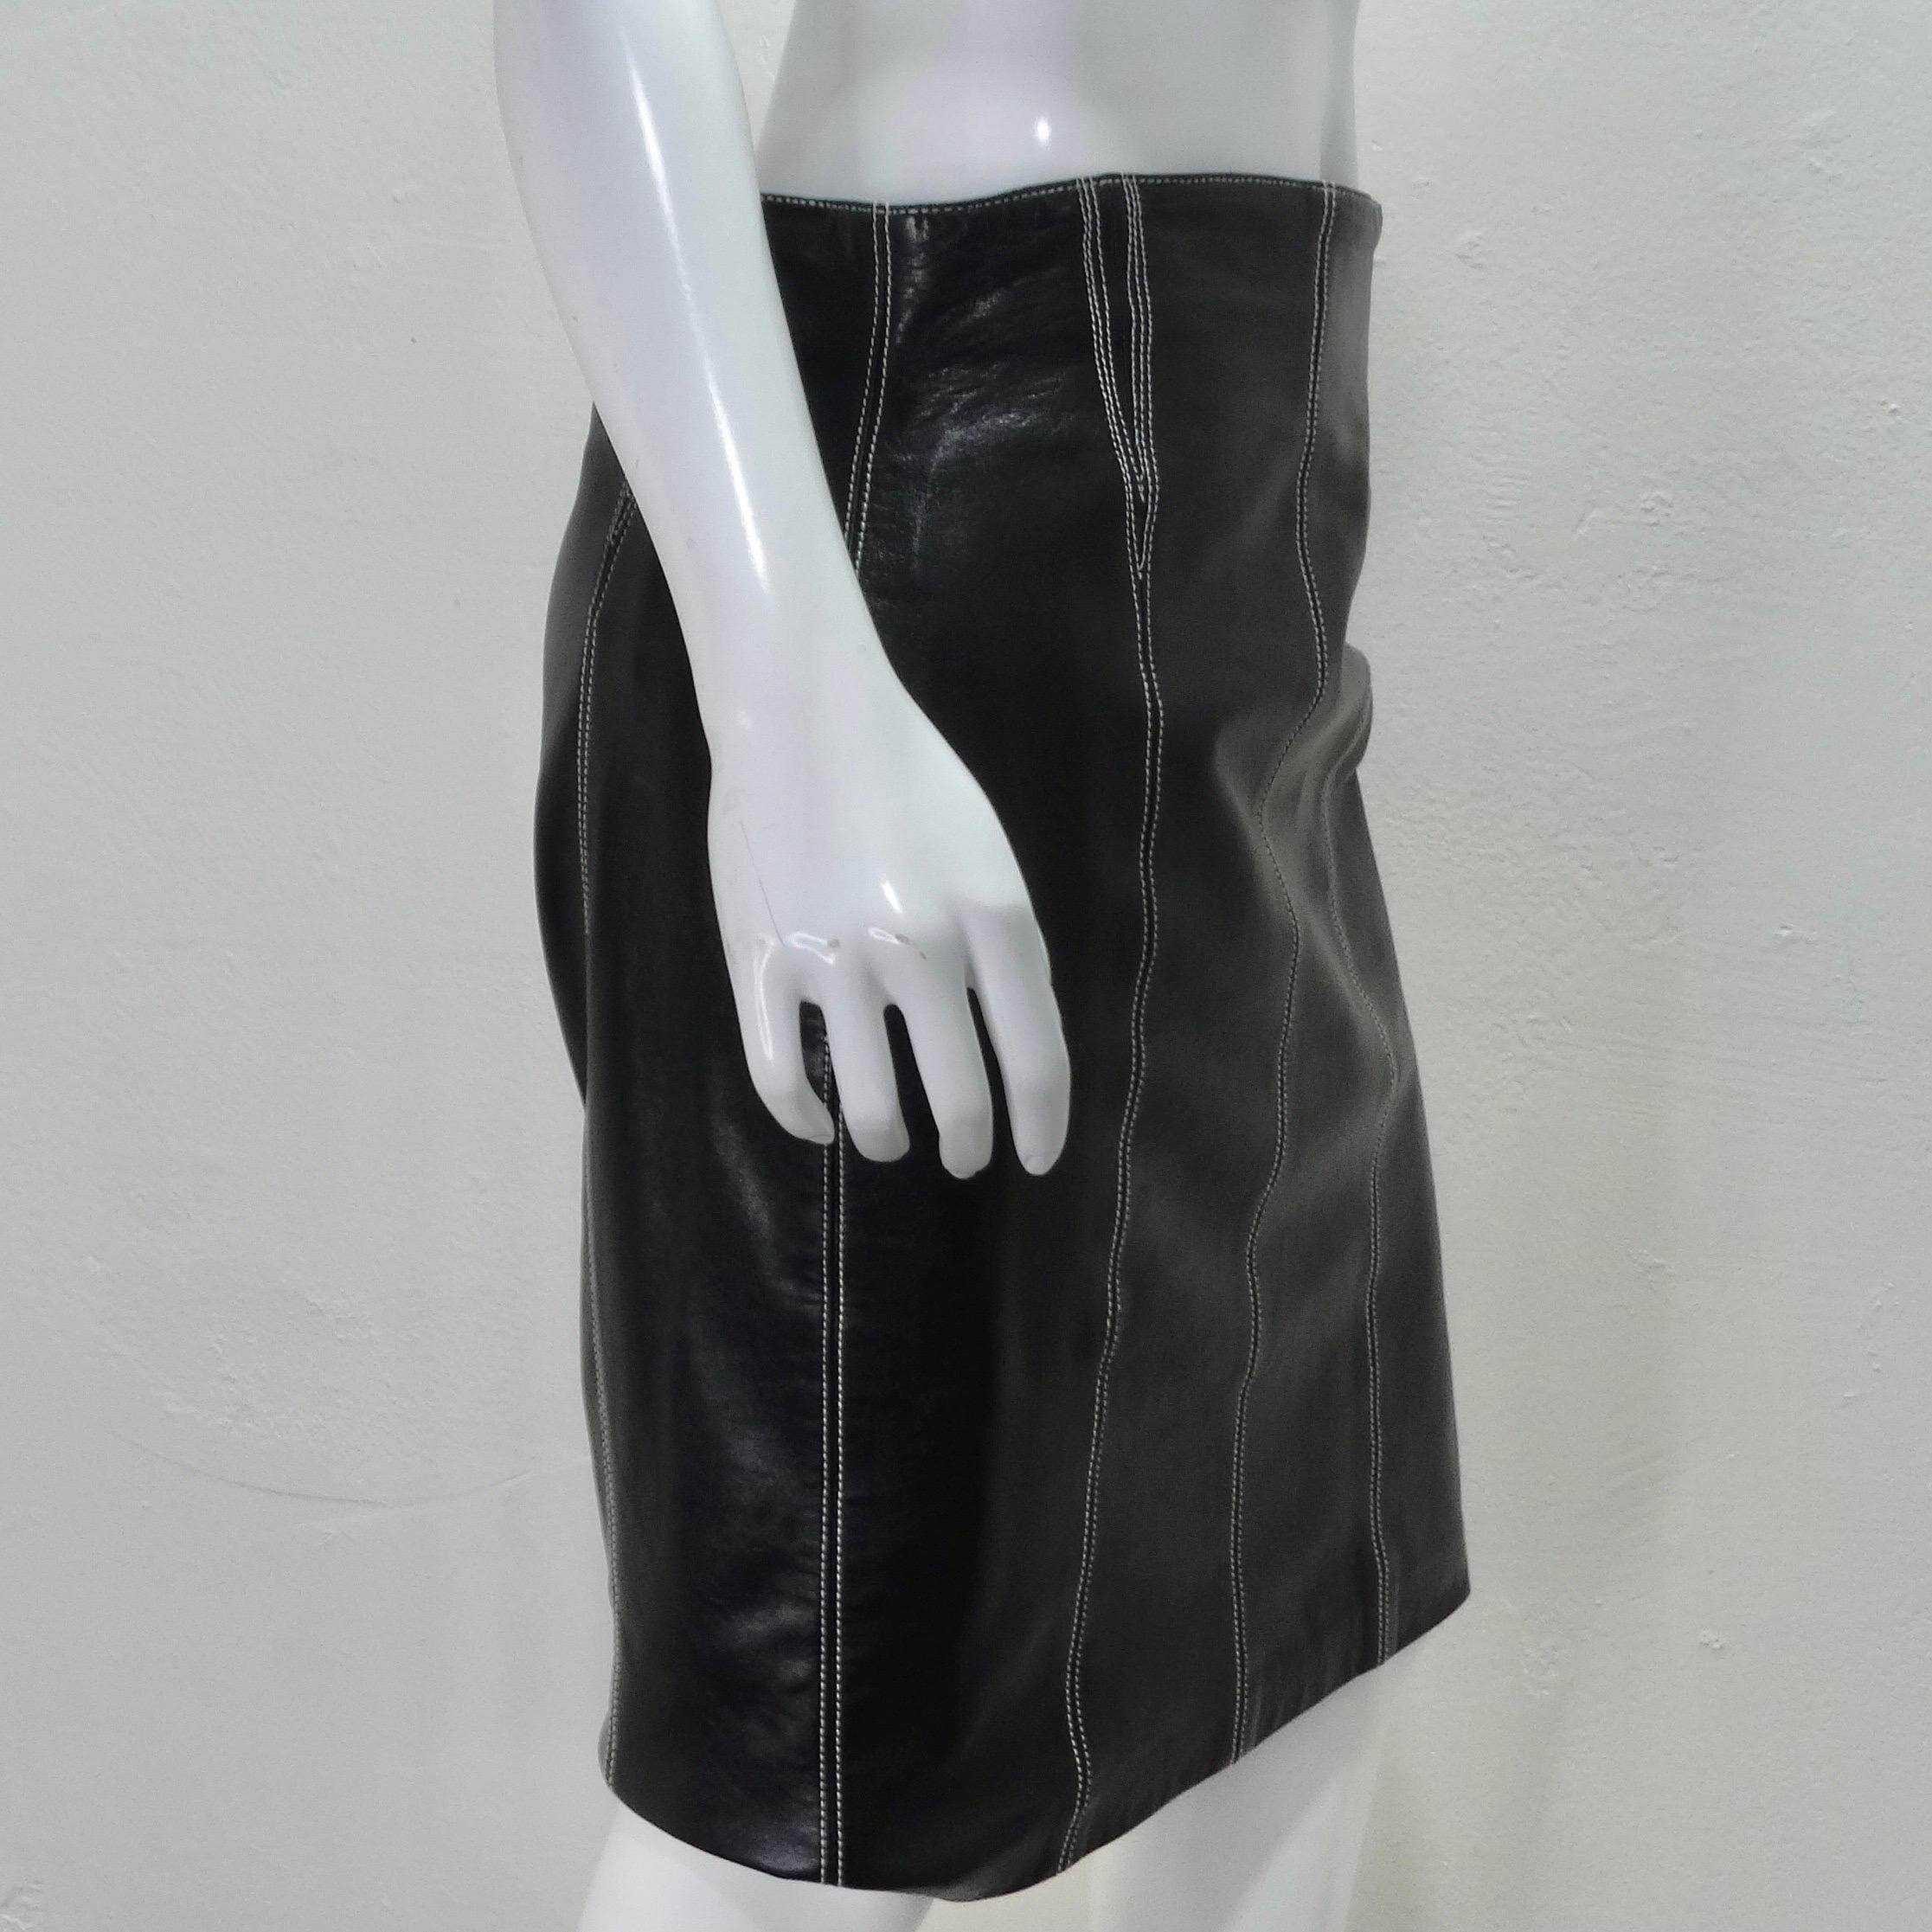 Vintage Escada Black Leather Pencil Skirt In Good Condition For Sale In Scottsdale, AZ